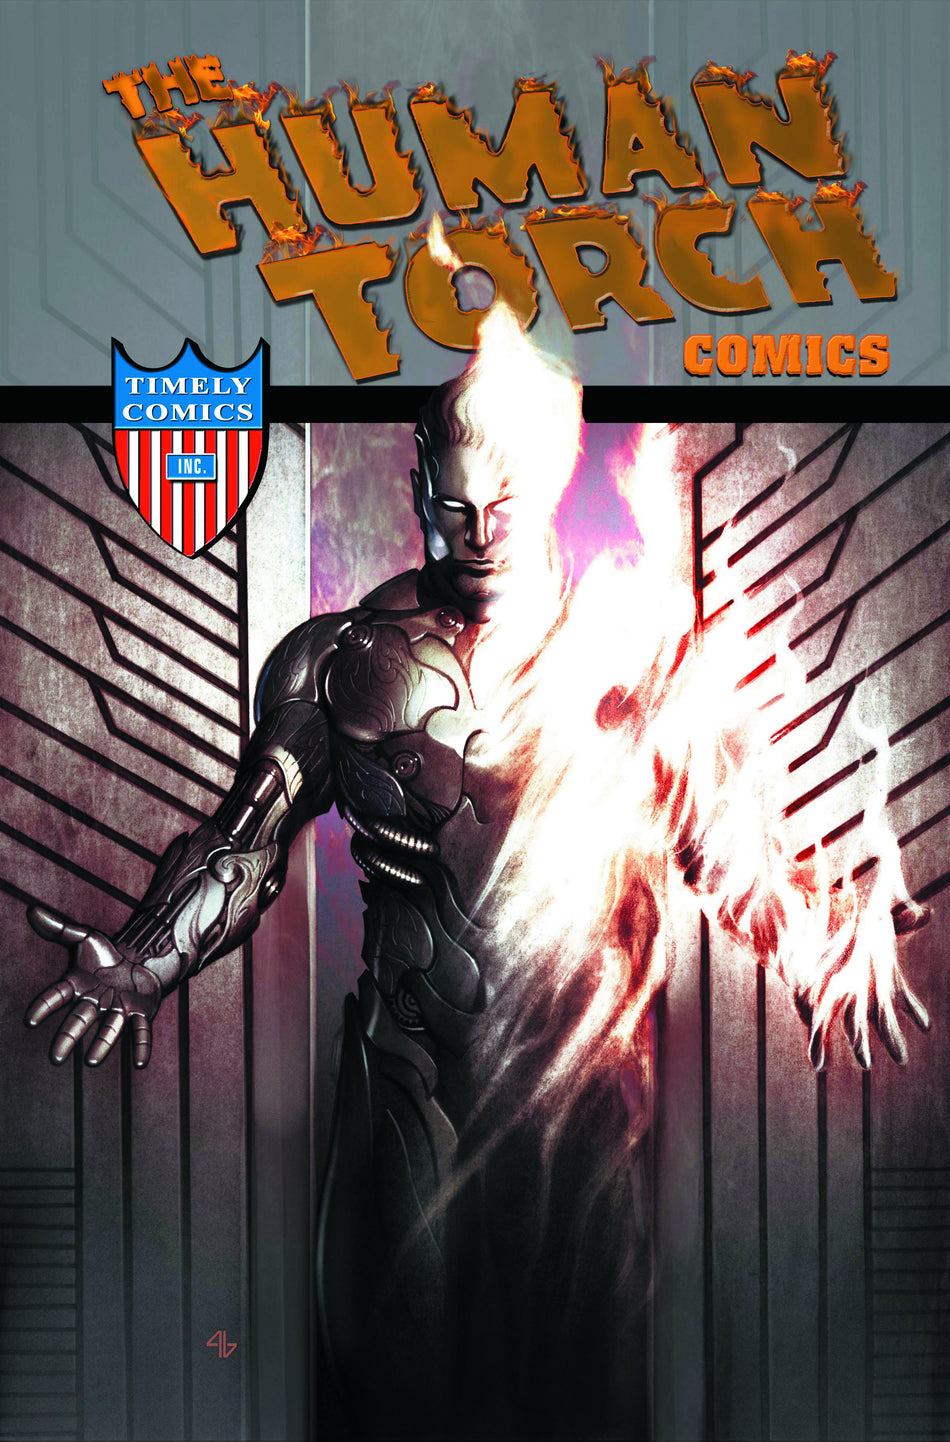 Photo of Human Torch Comics Issue 1 70th Anniv Special comic sold by Stronghold Collectibles